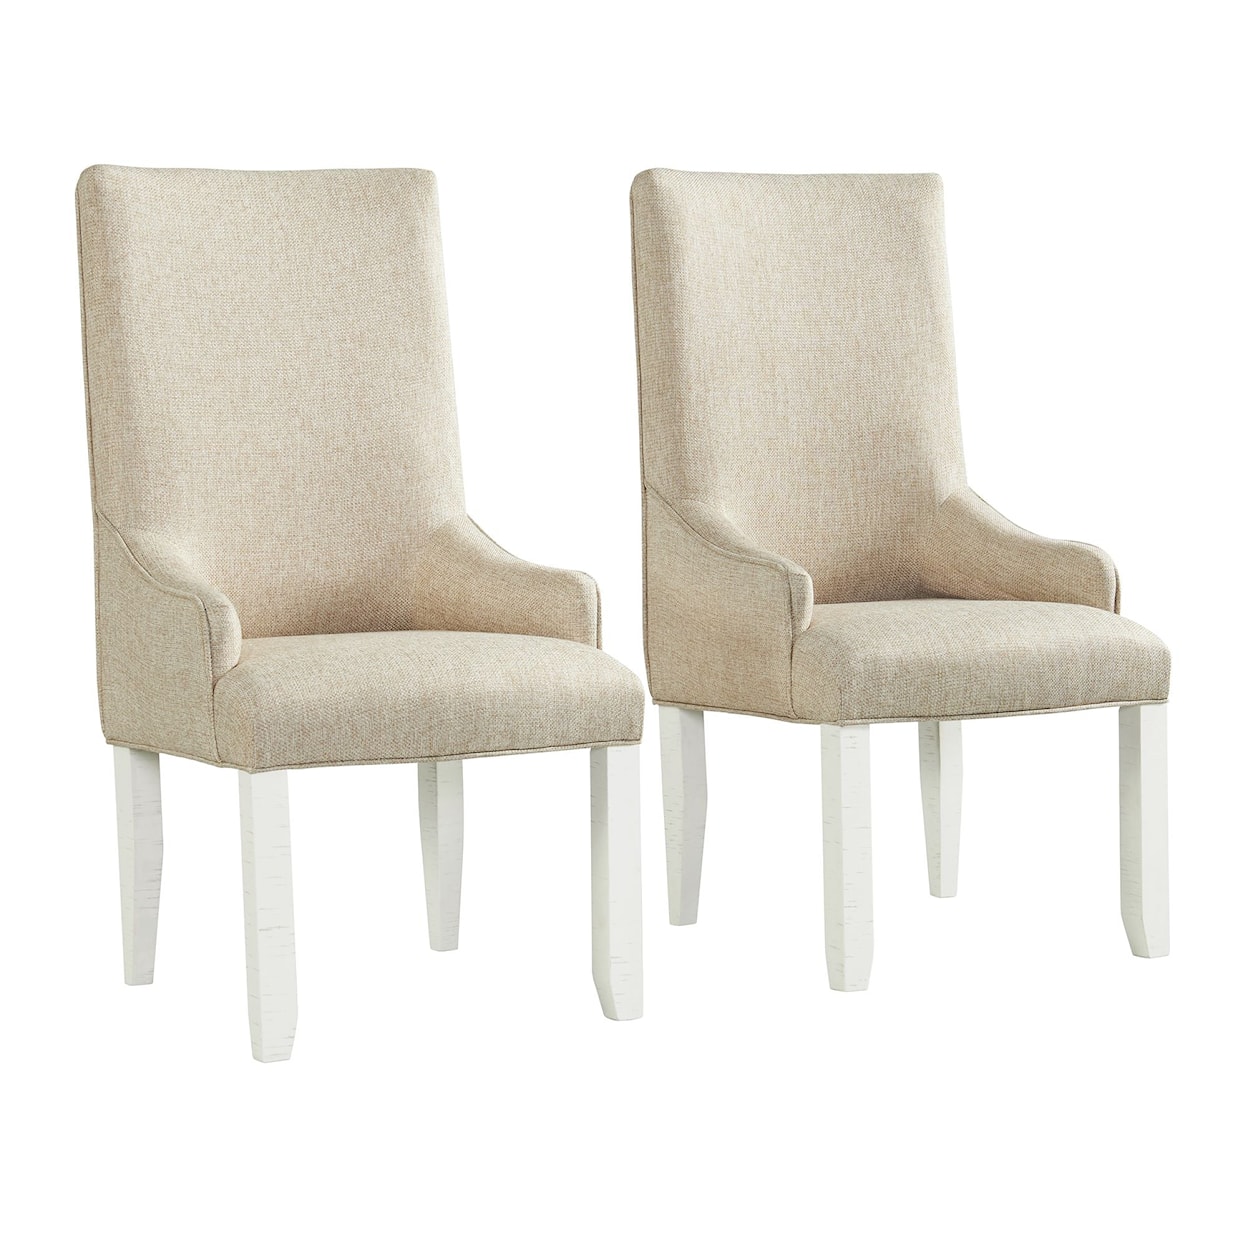 Elements International Stone Upholstered Dining Arm Chair Set